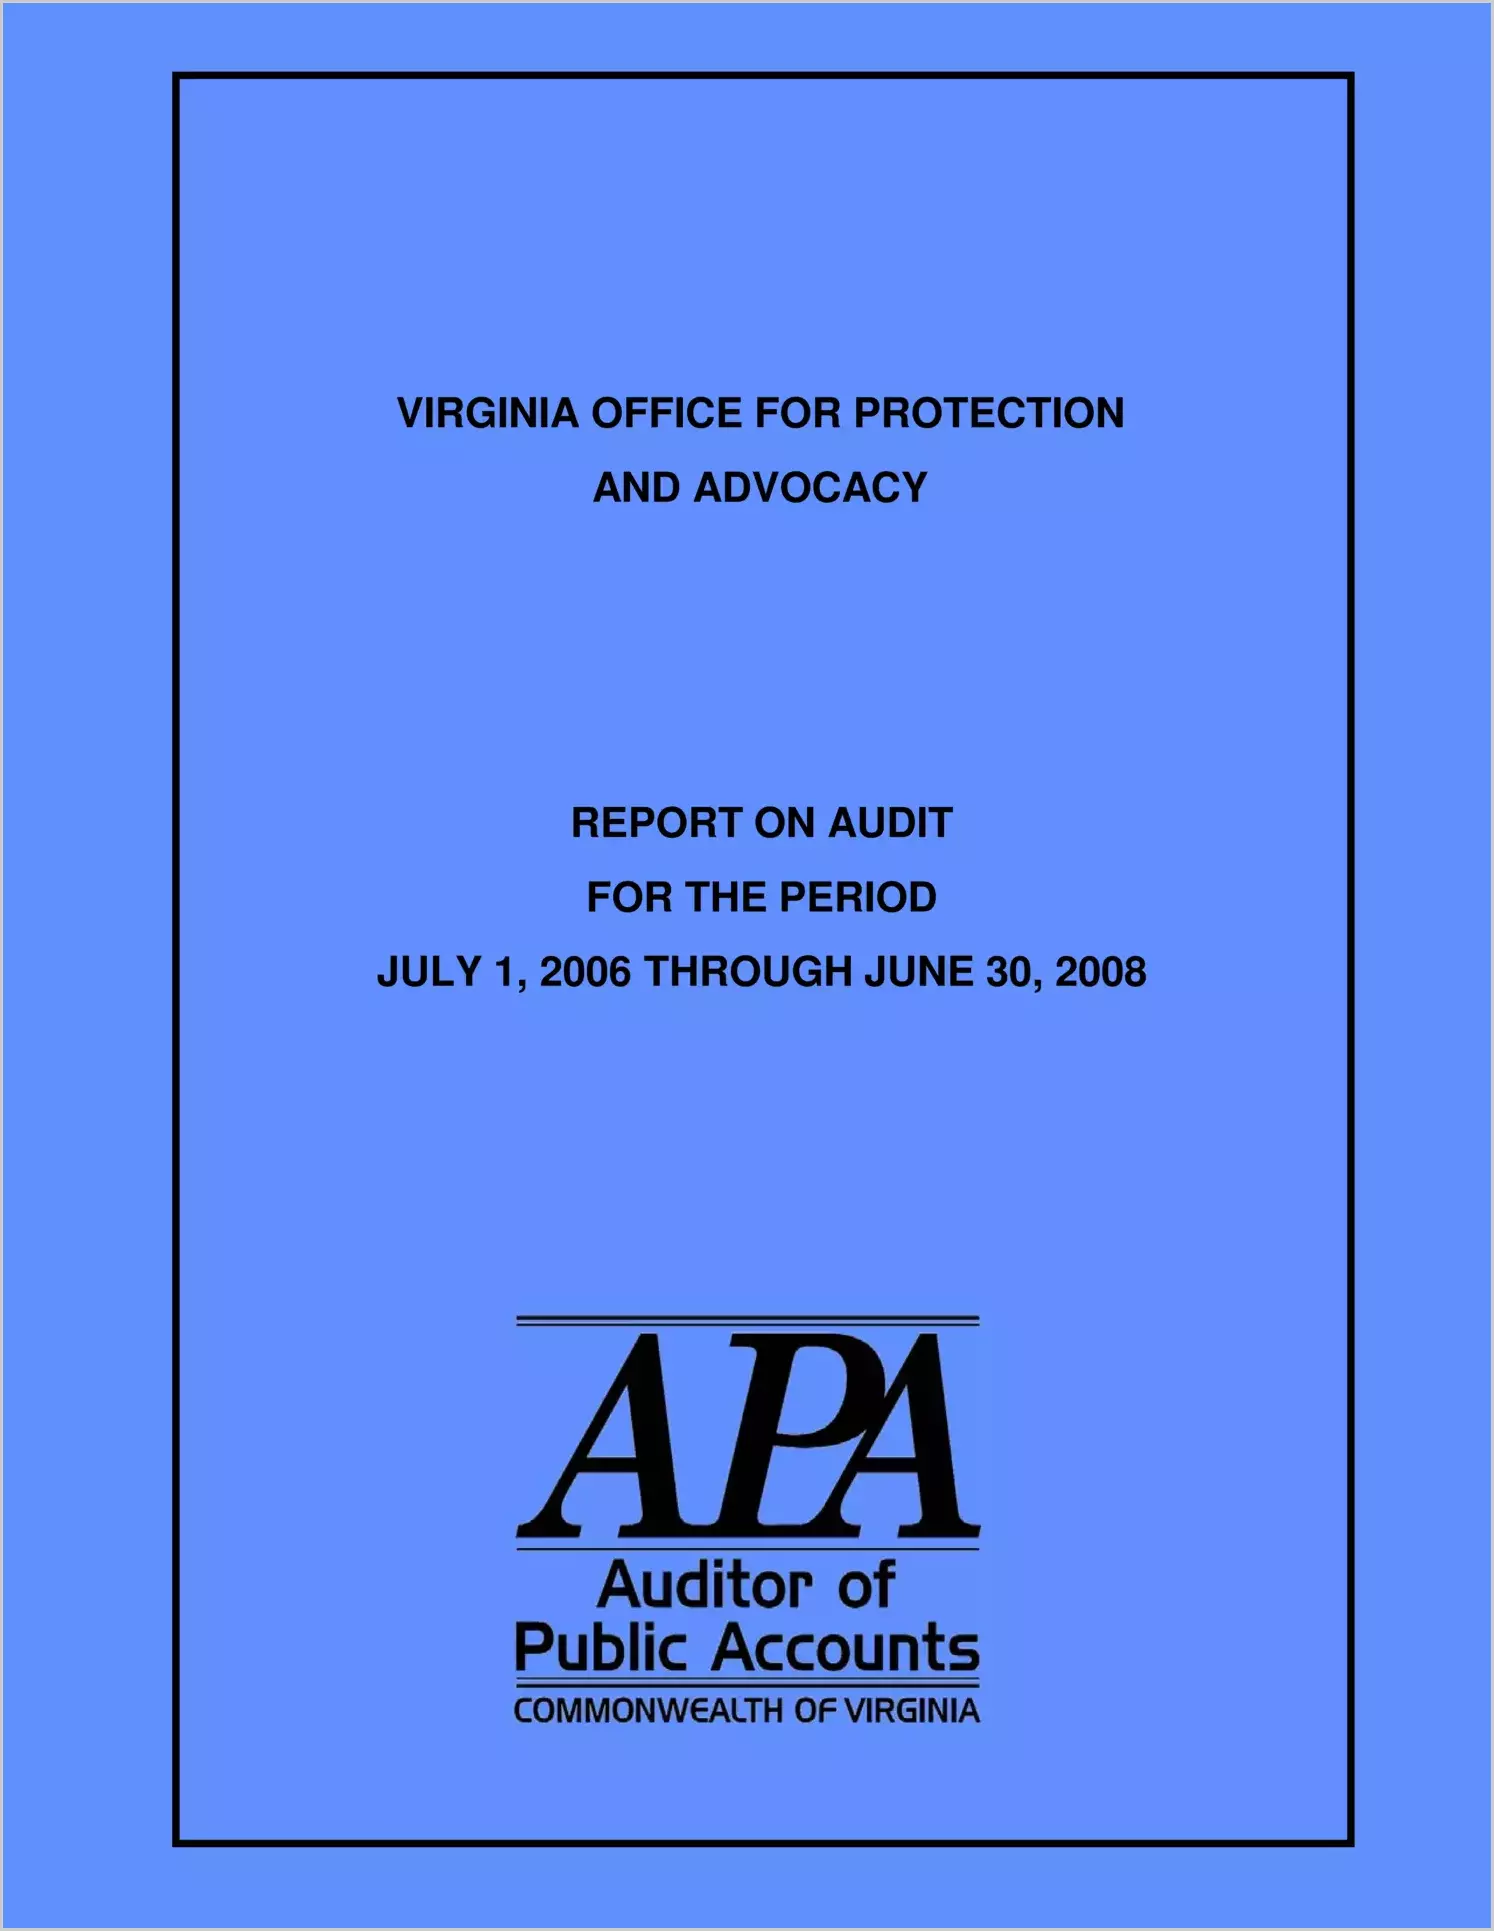 Virginia Office For Protection and Advocacy report on audit for the year ended June 30, 2008